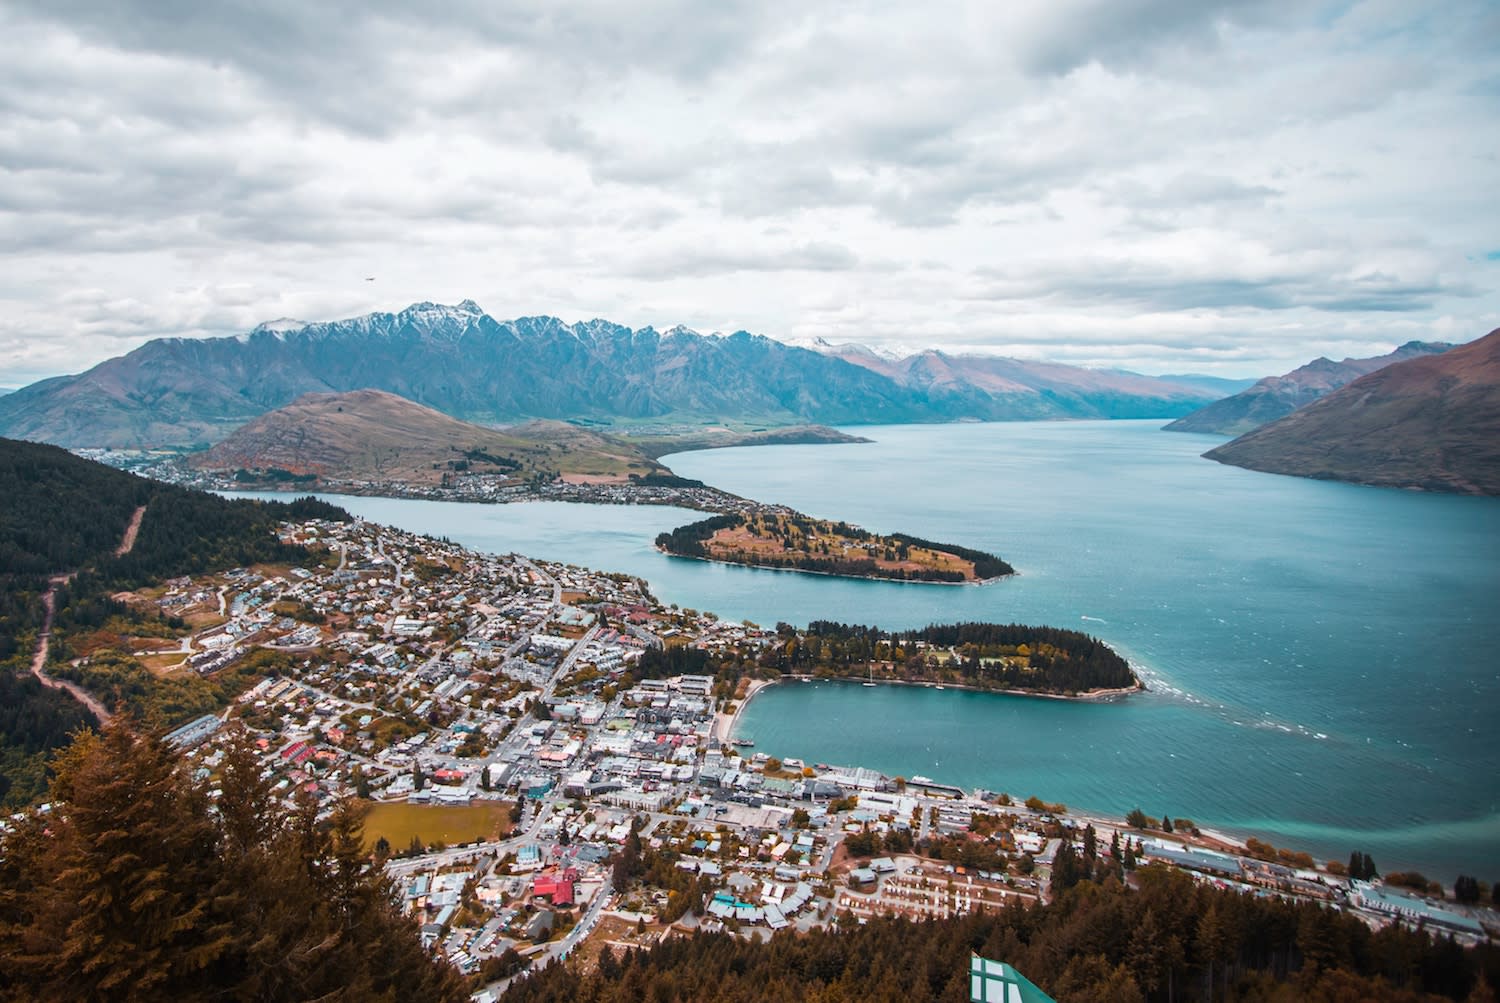 New Zealand to consider climate in all policy decisions